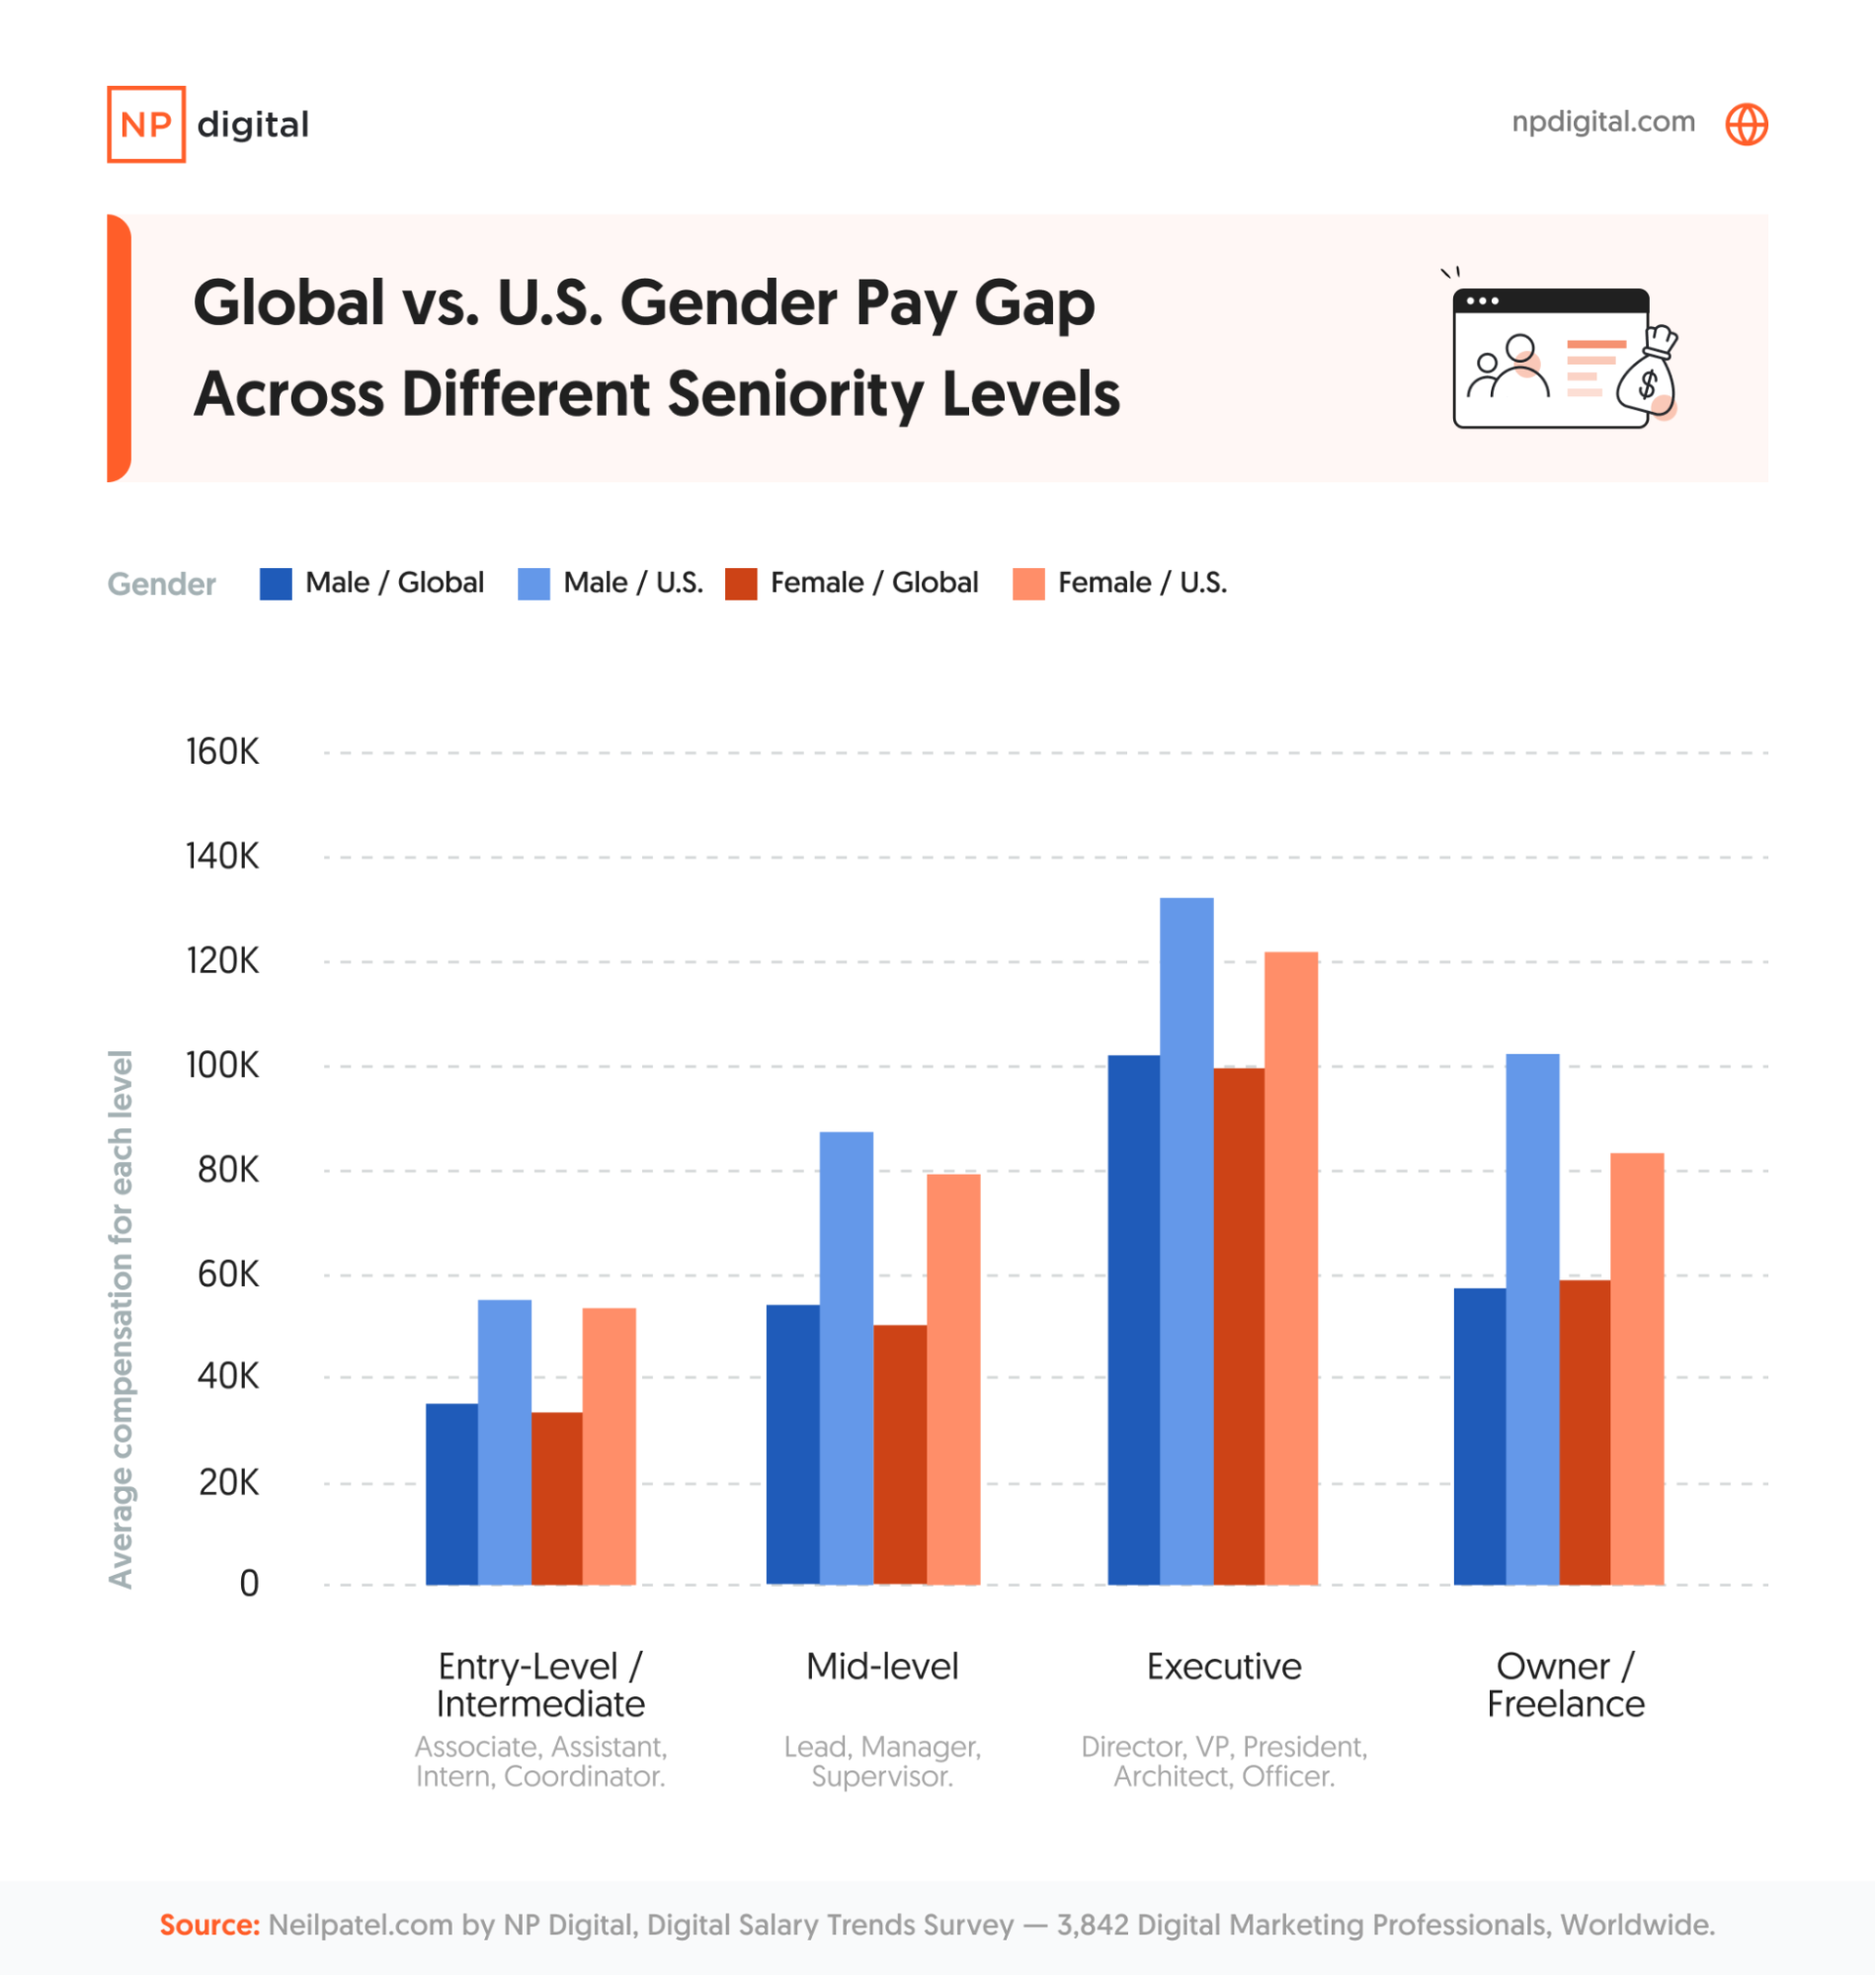 A bar chart showing the gender pay gap across different seniority levels globally